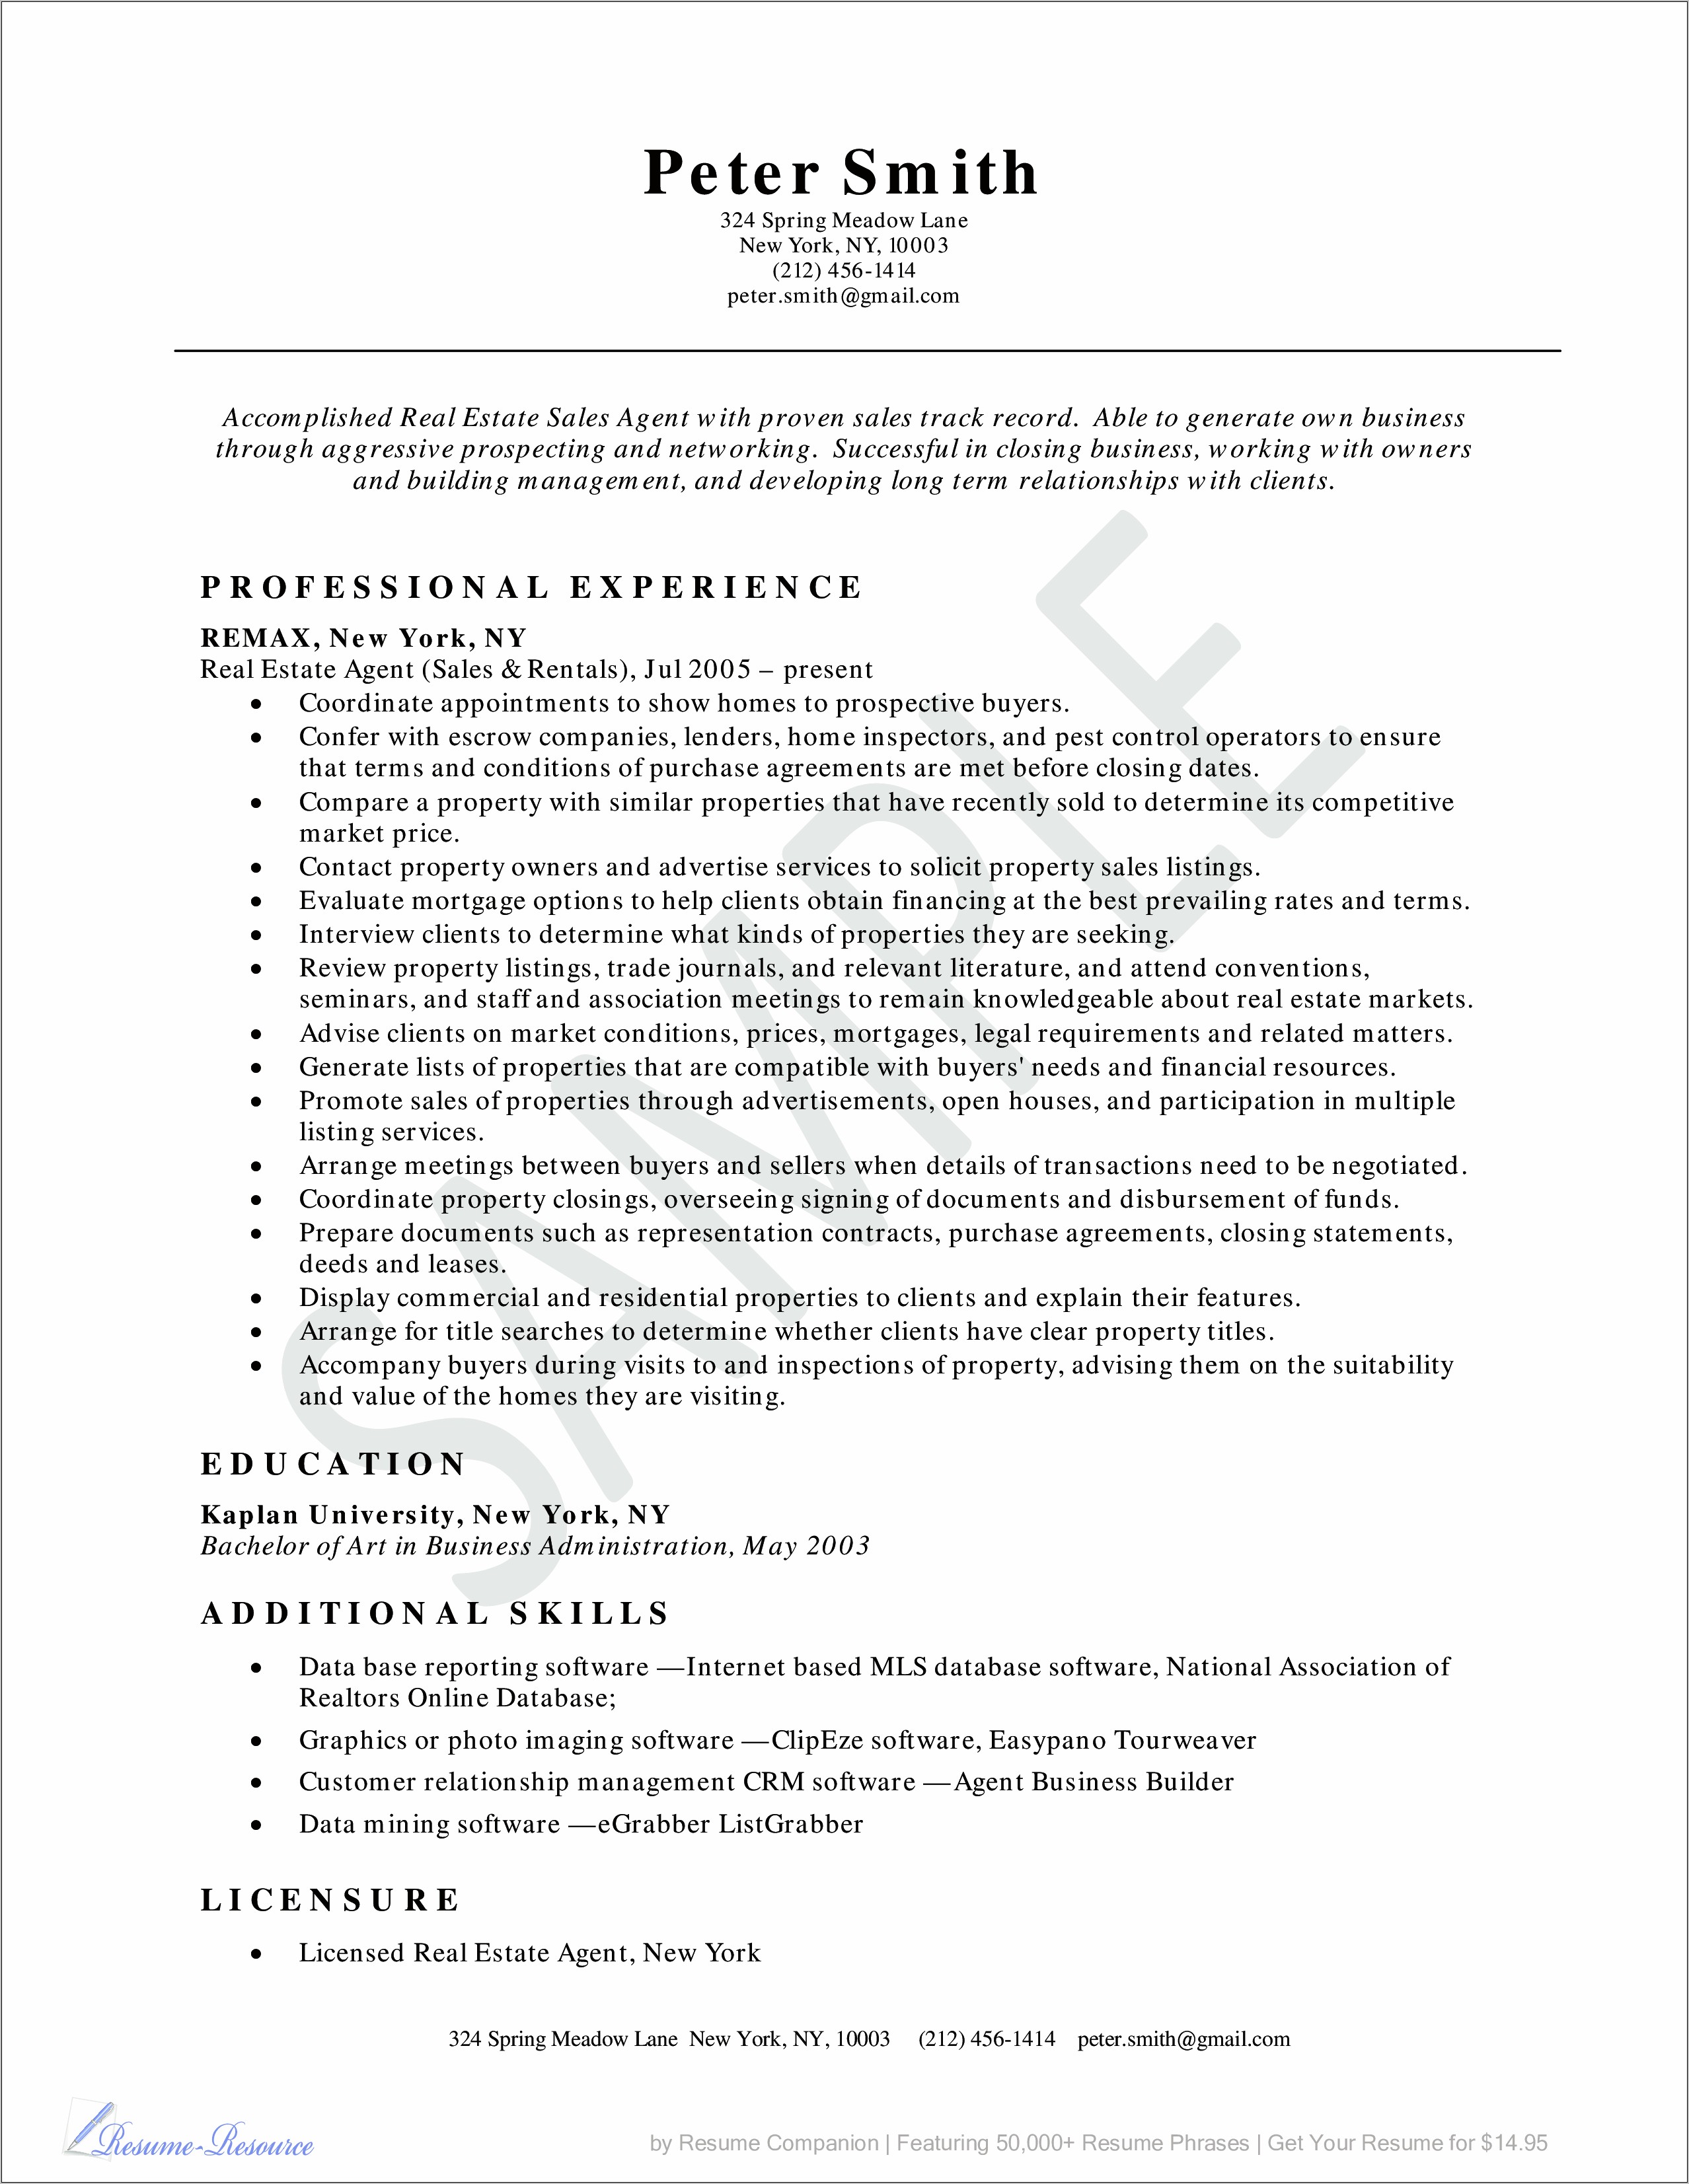 Resume Sample For Real Estate Agent With Experience